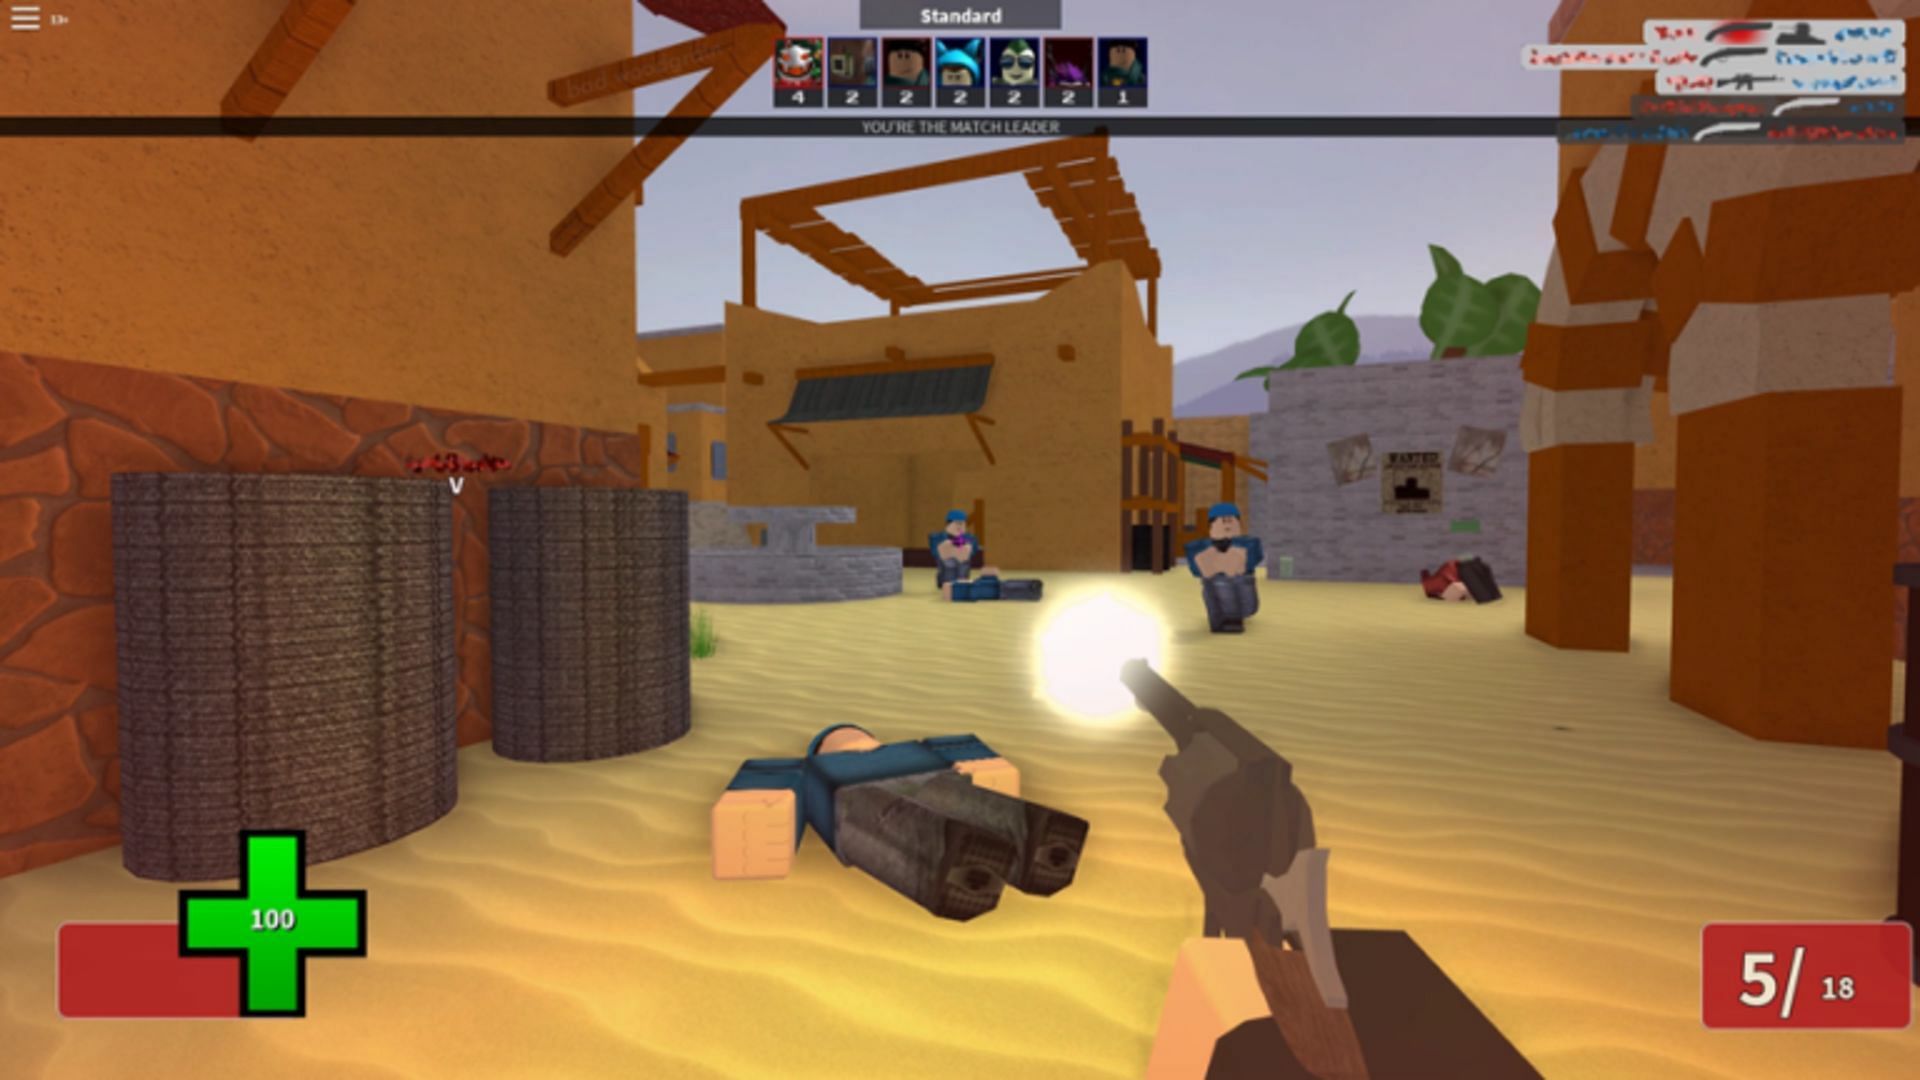 Players have to work together to win (Image via Roblox)